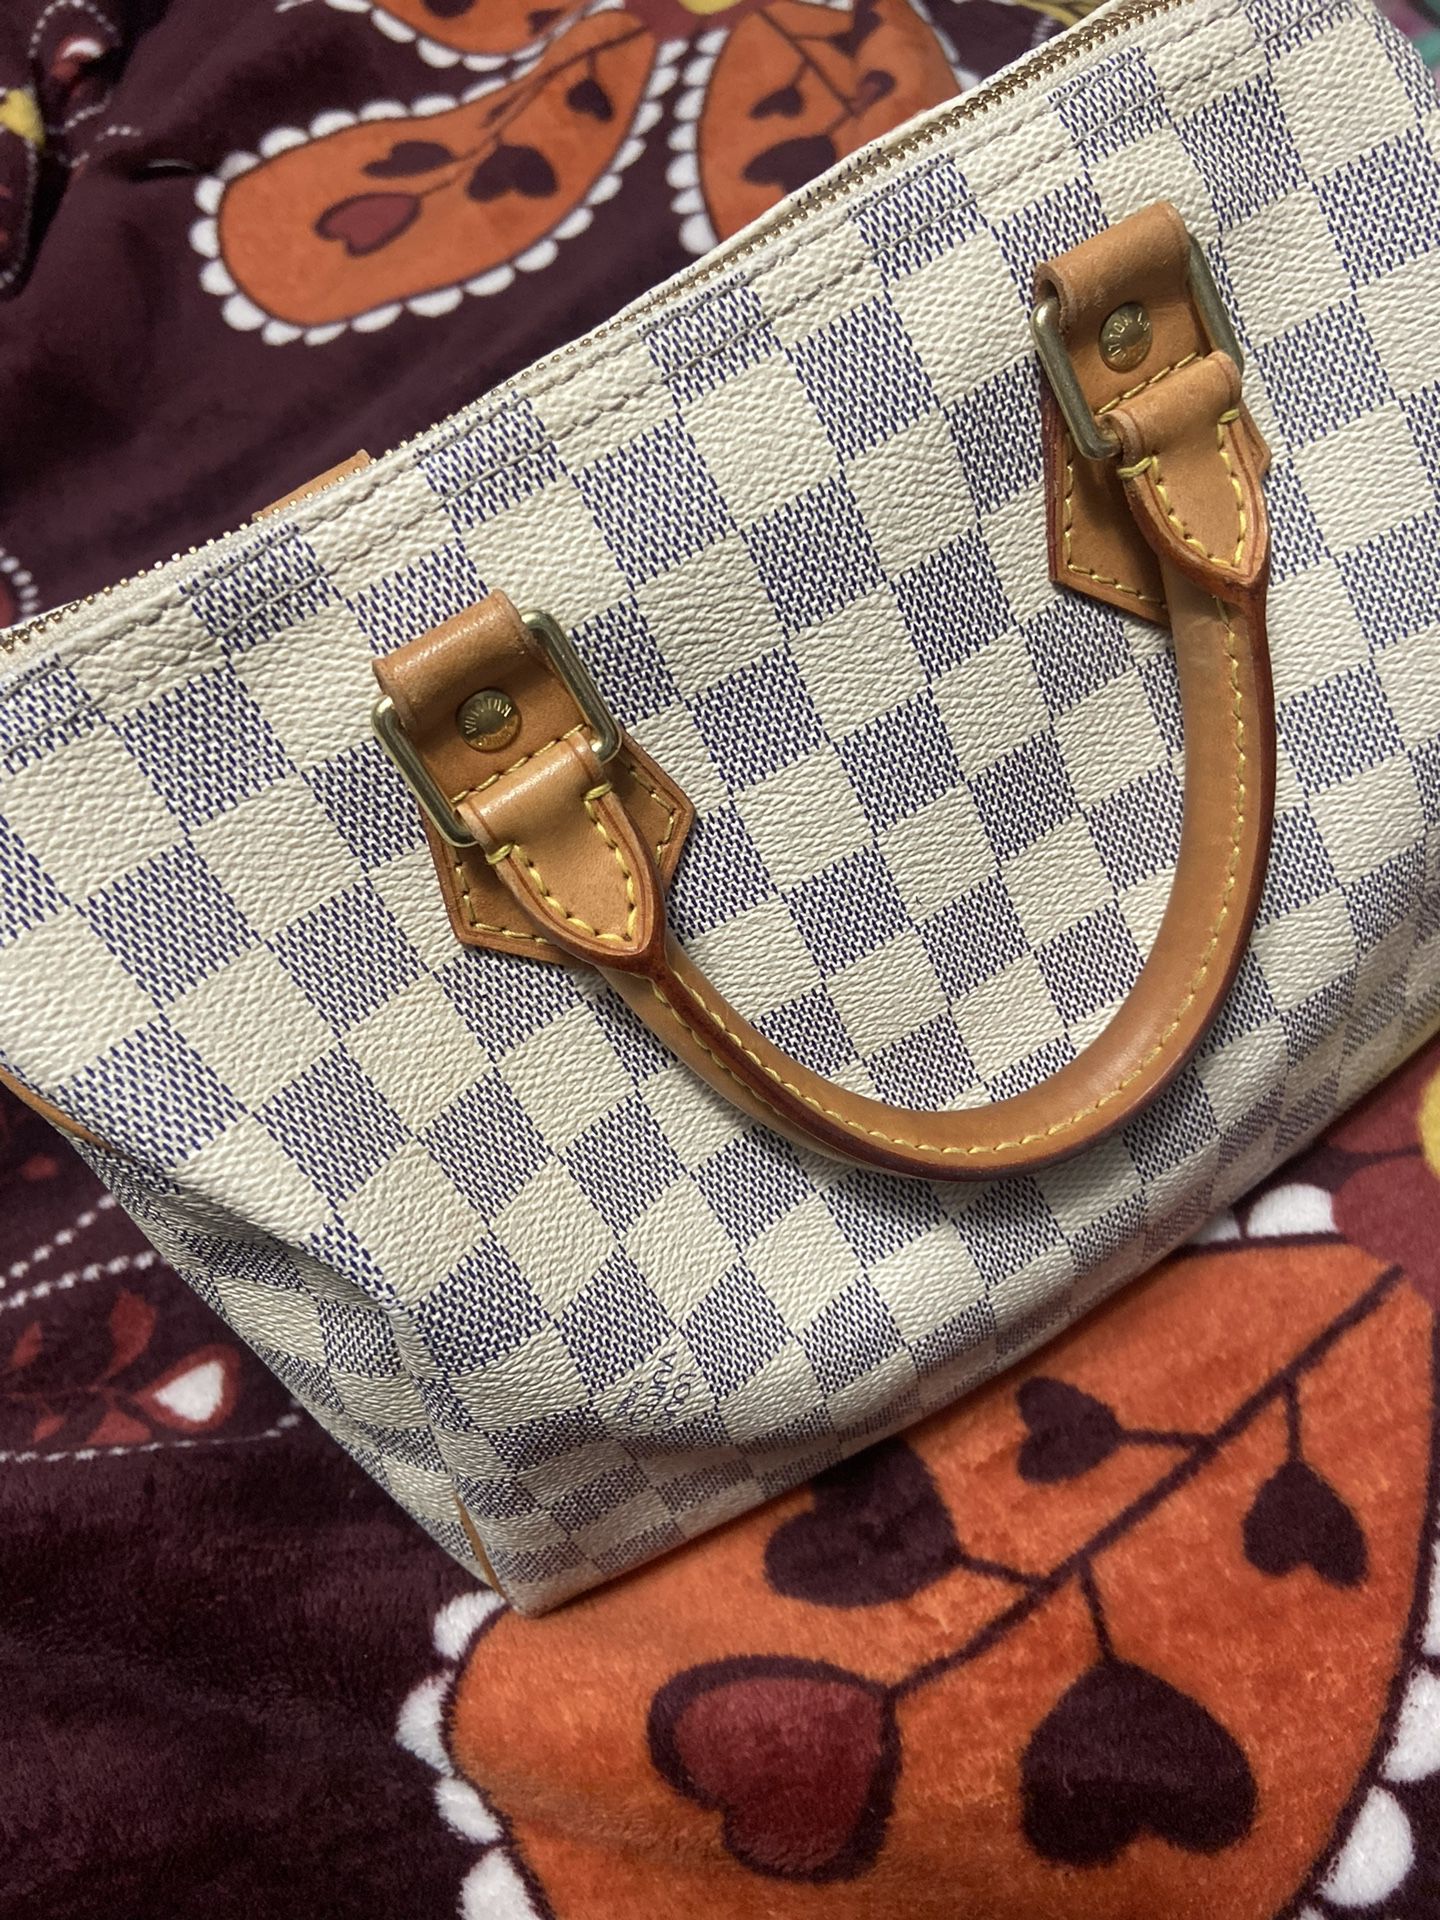 Authentic LV purse and wallet